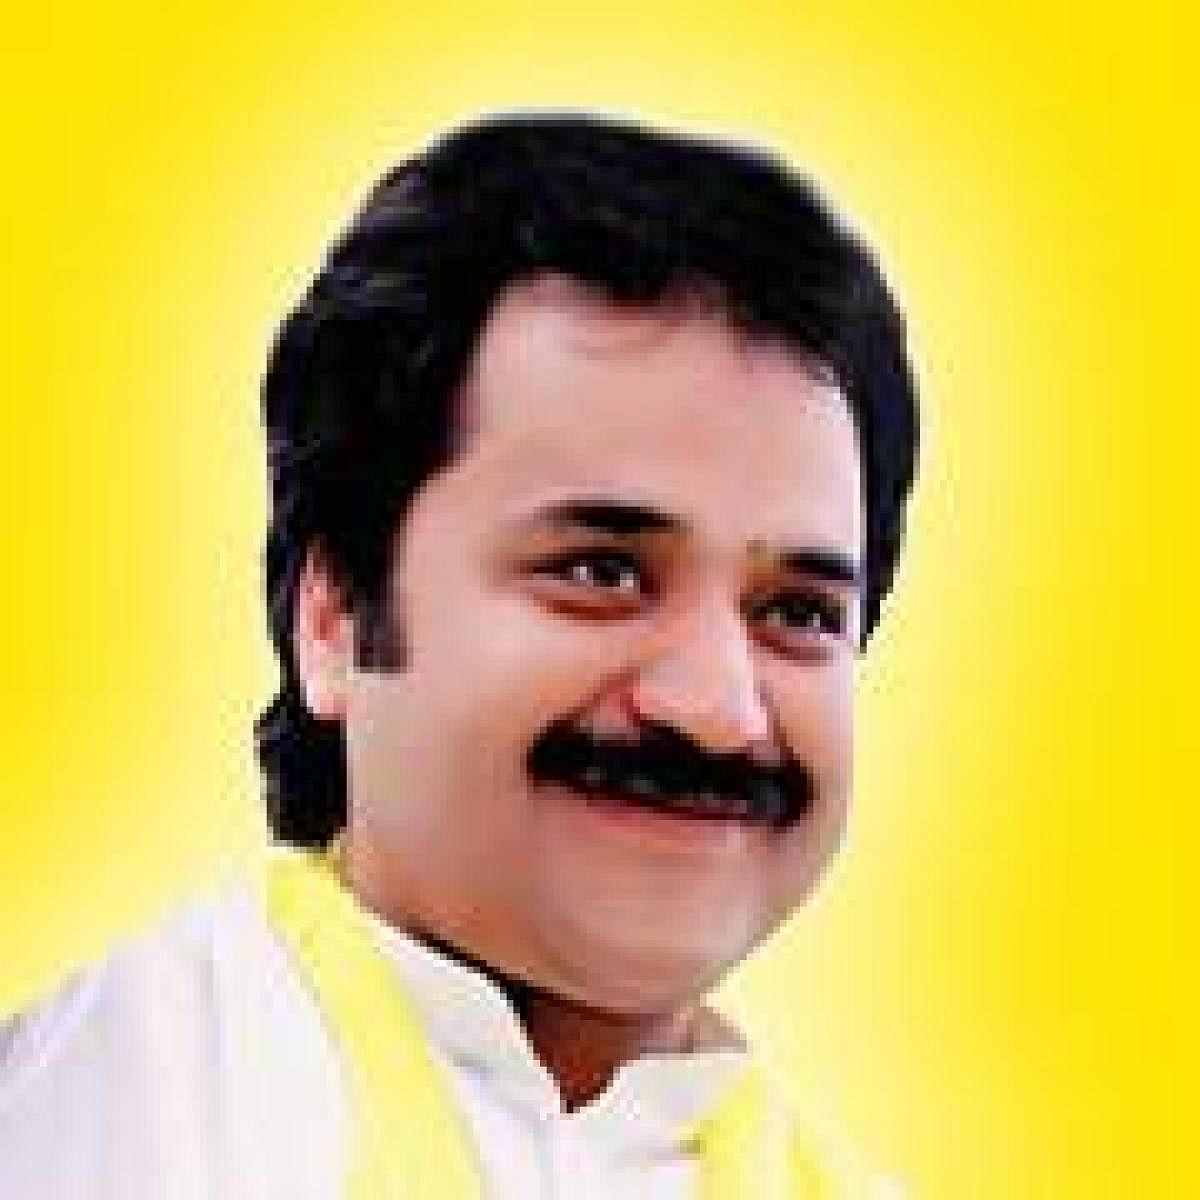 Kuldeep Bishnoi on Saturday criticised the BJP for trying to "harass" him and his family. Photo credit: Facebook